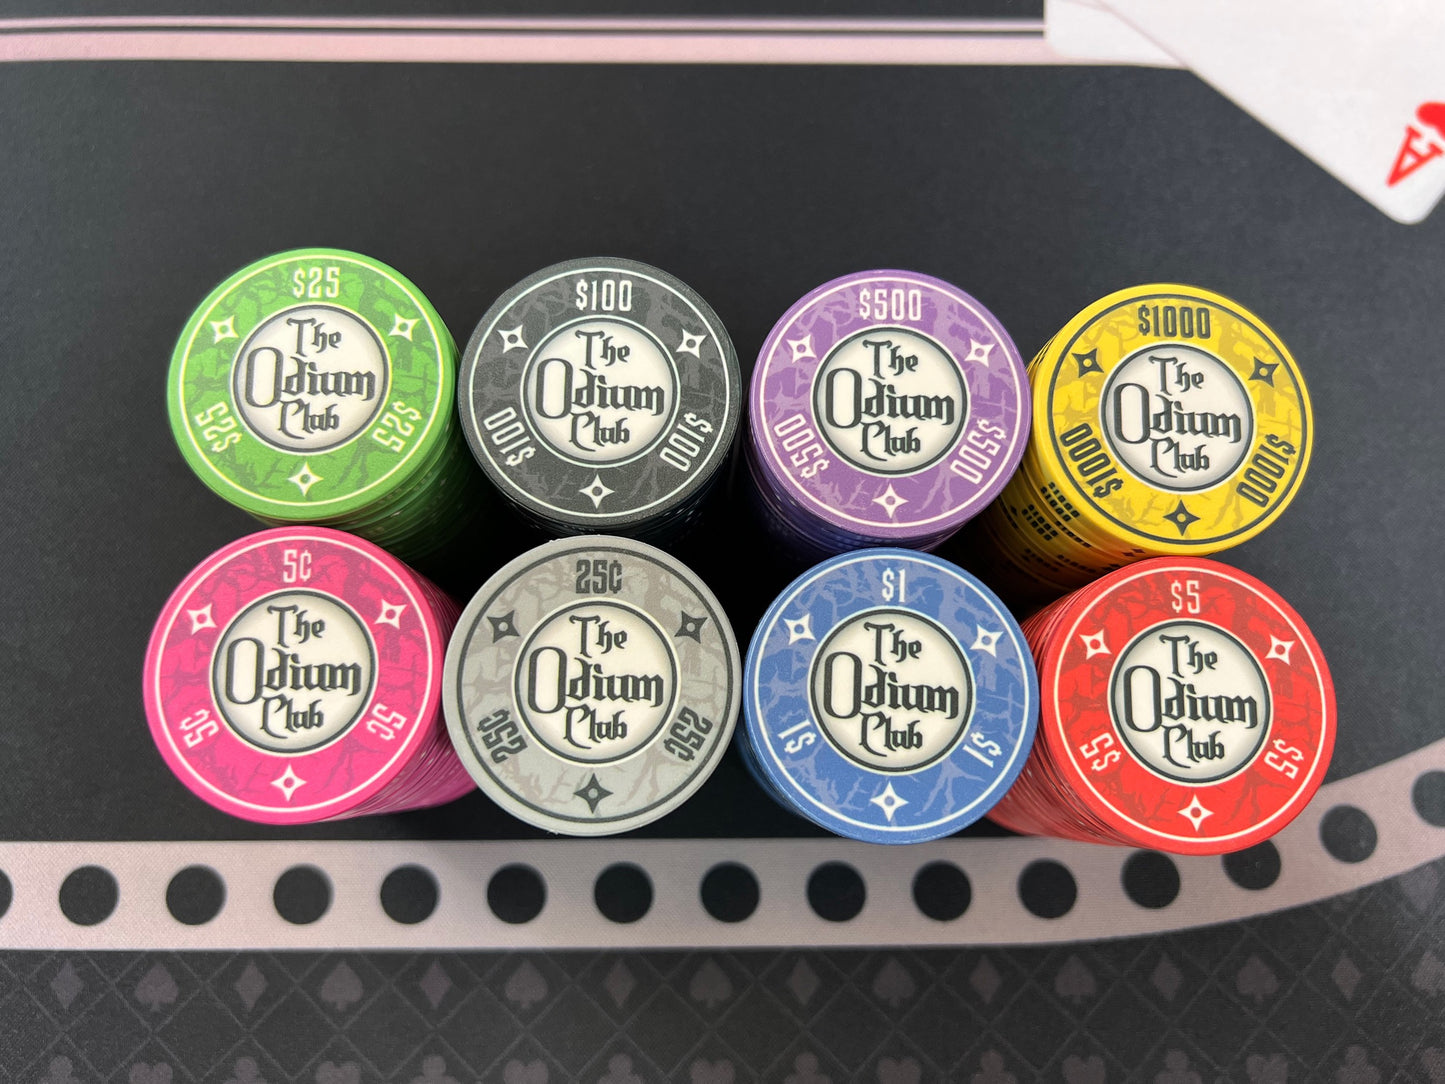 All eight of the stock colors and denominations of the modern-looking Odium Club poker chips, top-down view. Both faces are identical. Each side shows the logo in the poker chip inlay and the poker chip denoms around the edge. Available dollar values are 5¢ pink, 25¢ gray, $1 blue, $5 red, $25 green, $100 black, $500 purple, and $1000 yellow.